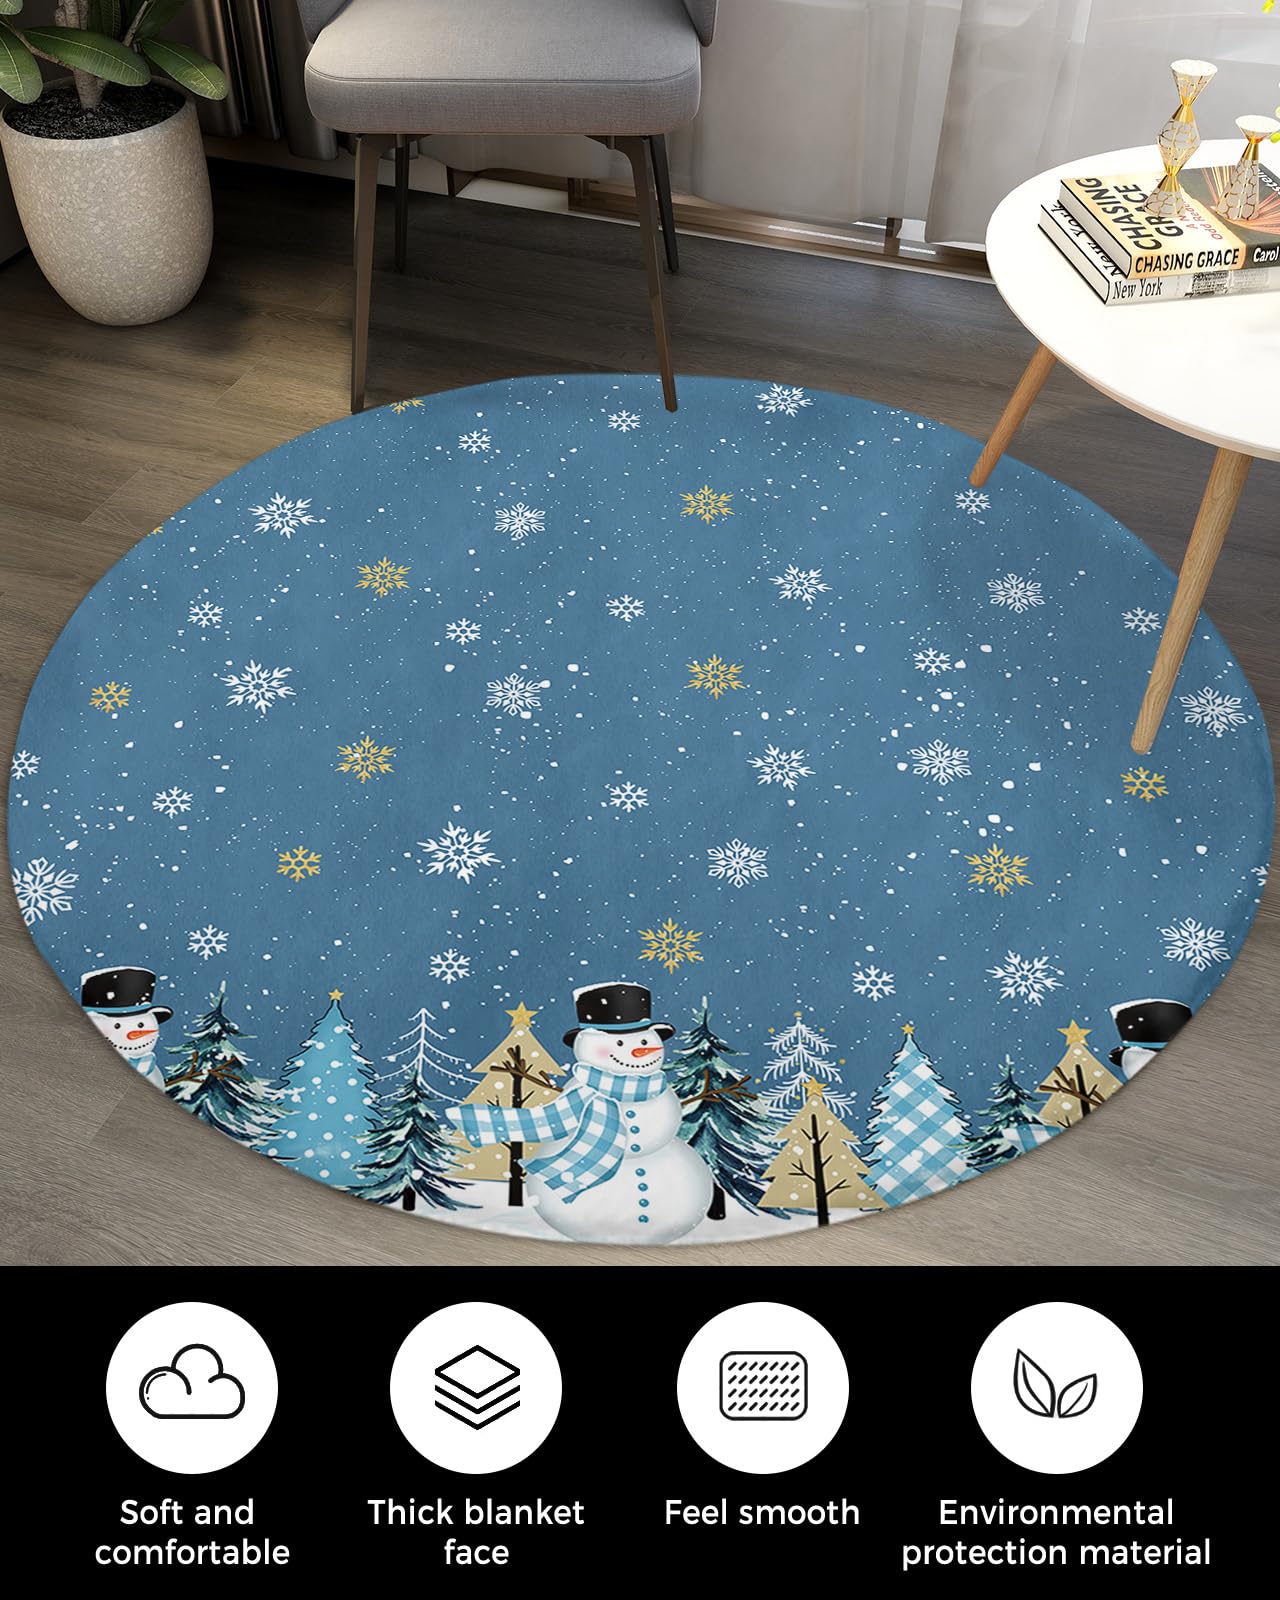 Christmas Snowman Fluffy Round Area Rug Carpets 3.3ft, Plush Shaggy Carpet Soft Circular Rugs, Non-Slip Fuzzy Accent Floor Mat for Living Room Bedroom Nursery Home Decor Blue Winter Tree Snowflake